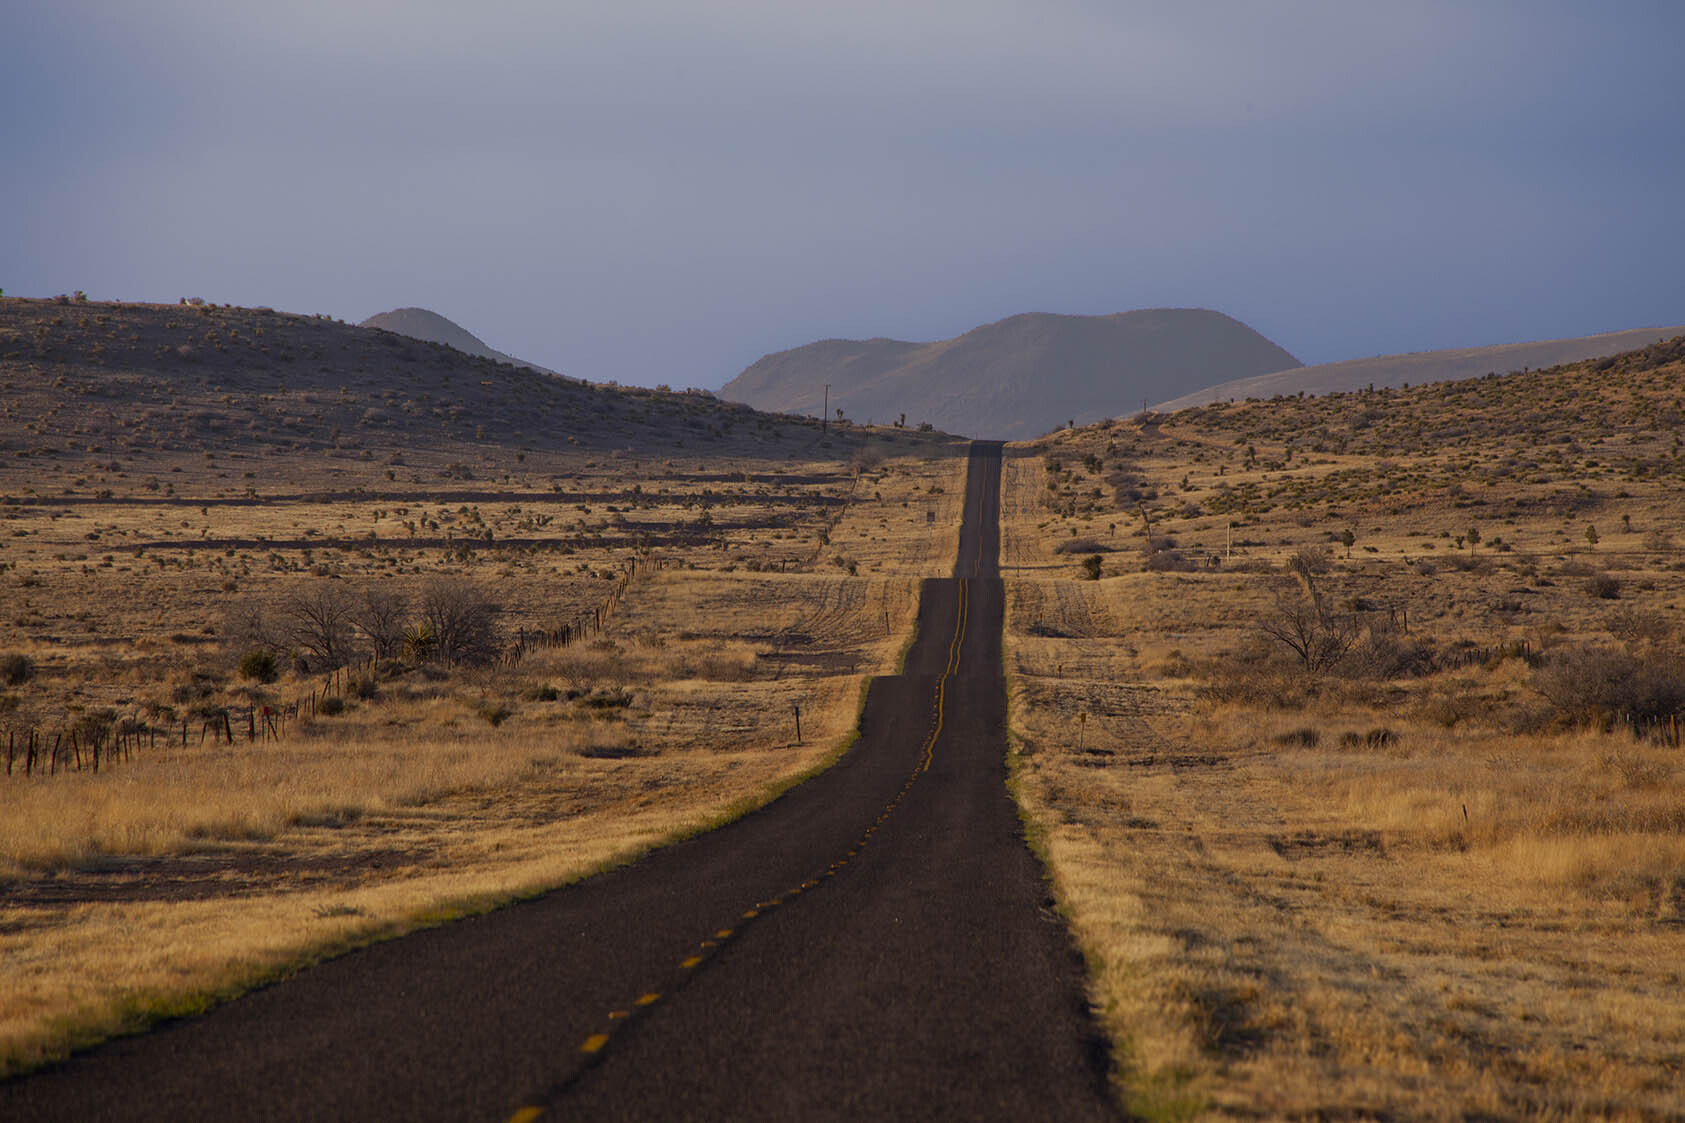 A stretch of highway runs up the middle of the image, with the Davis Mountains in the distance. Photo by Will van Overbeek